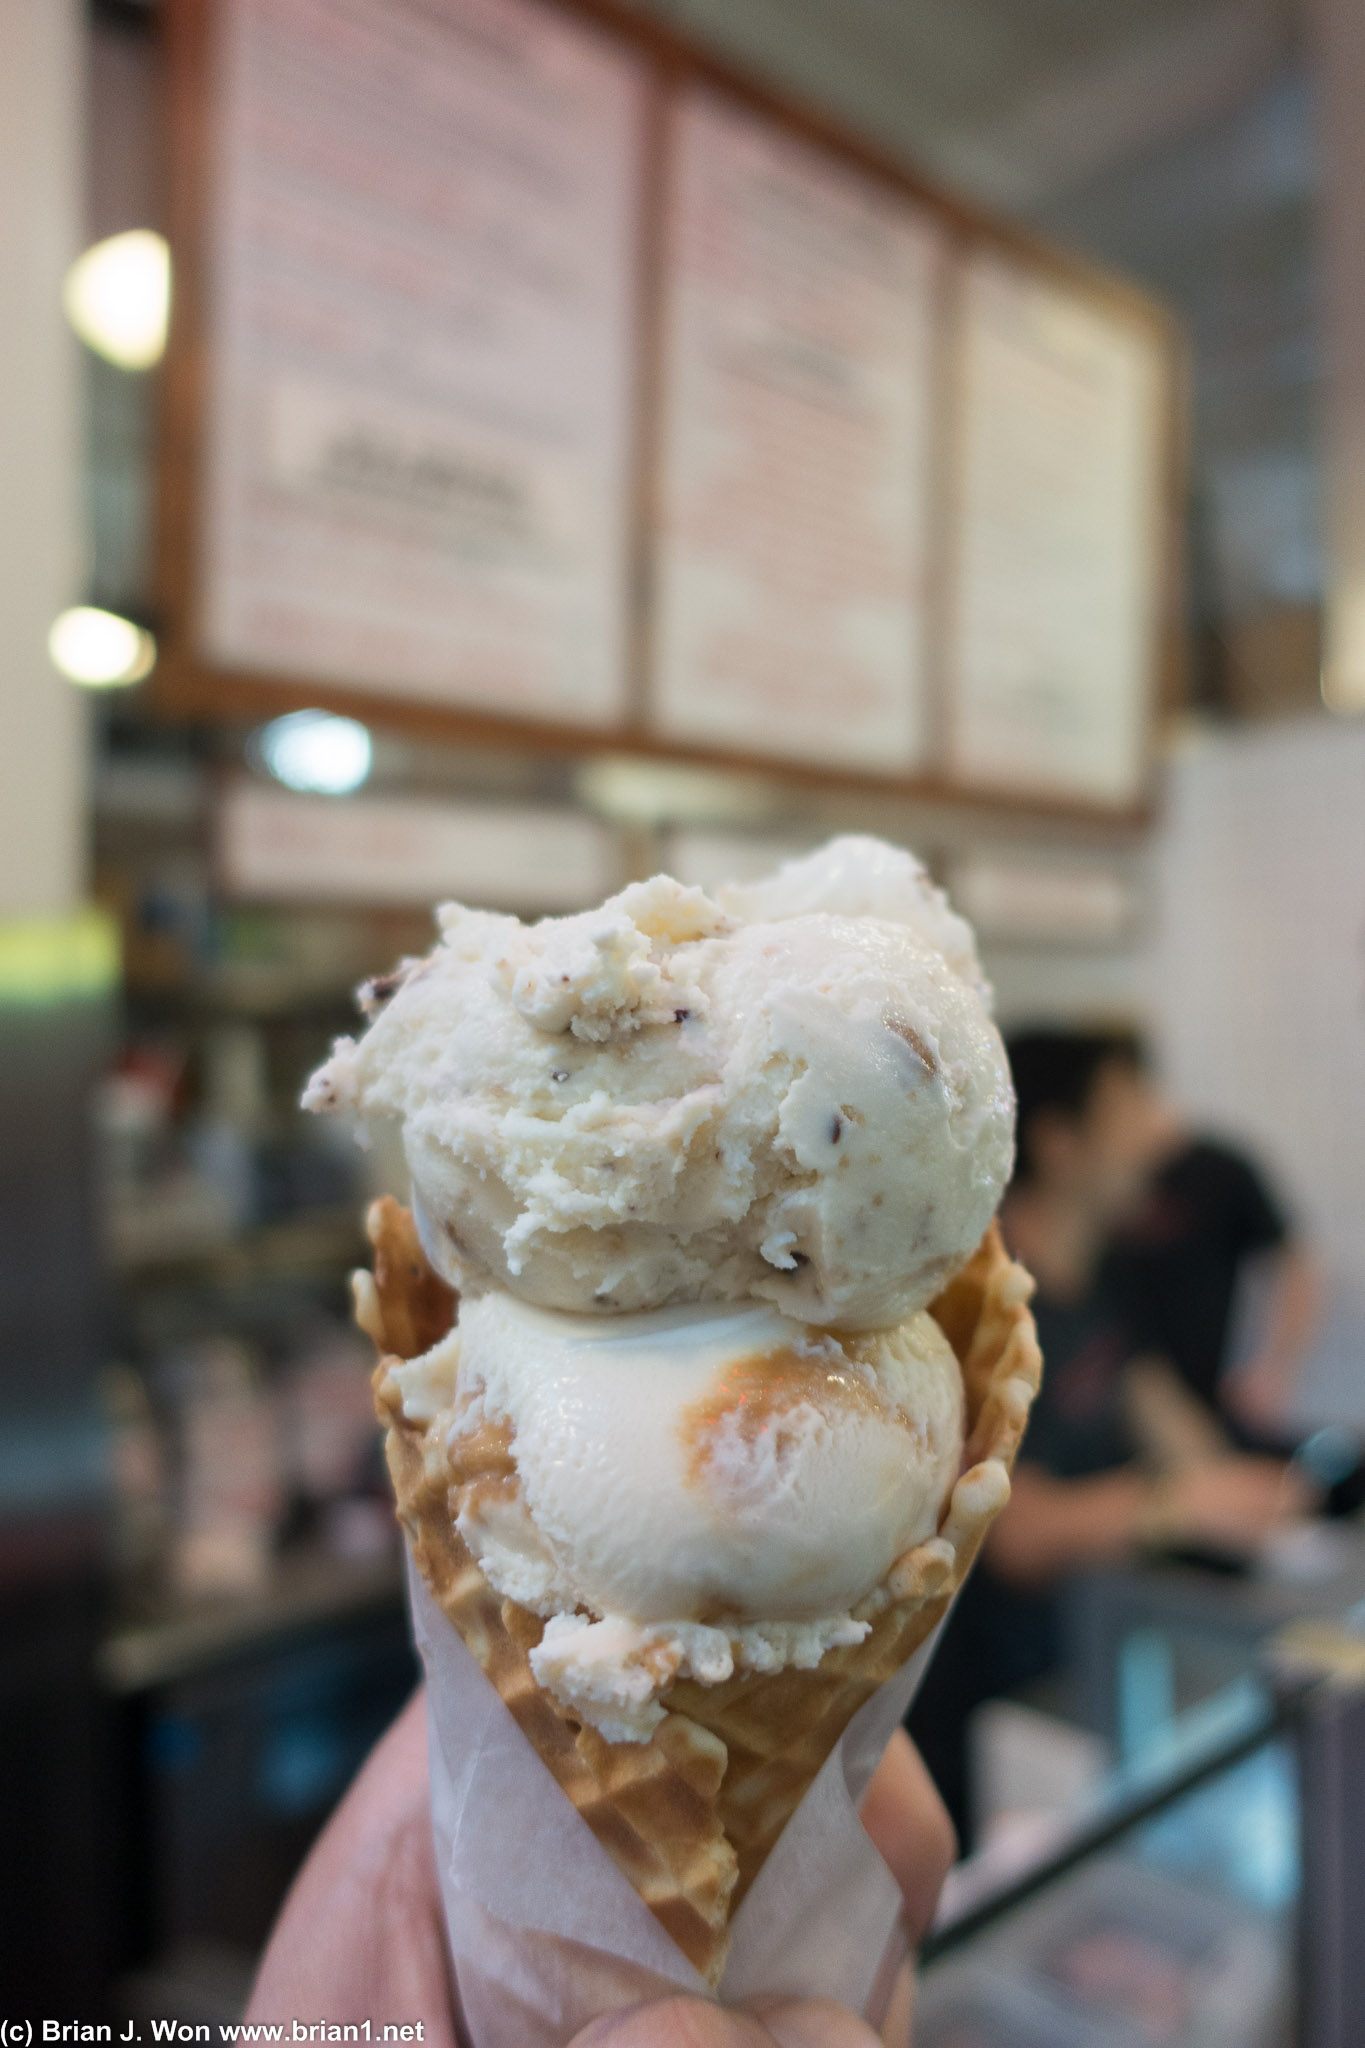 Sea salt cream and cookies atop banana & salted caramel in a waffle cone.